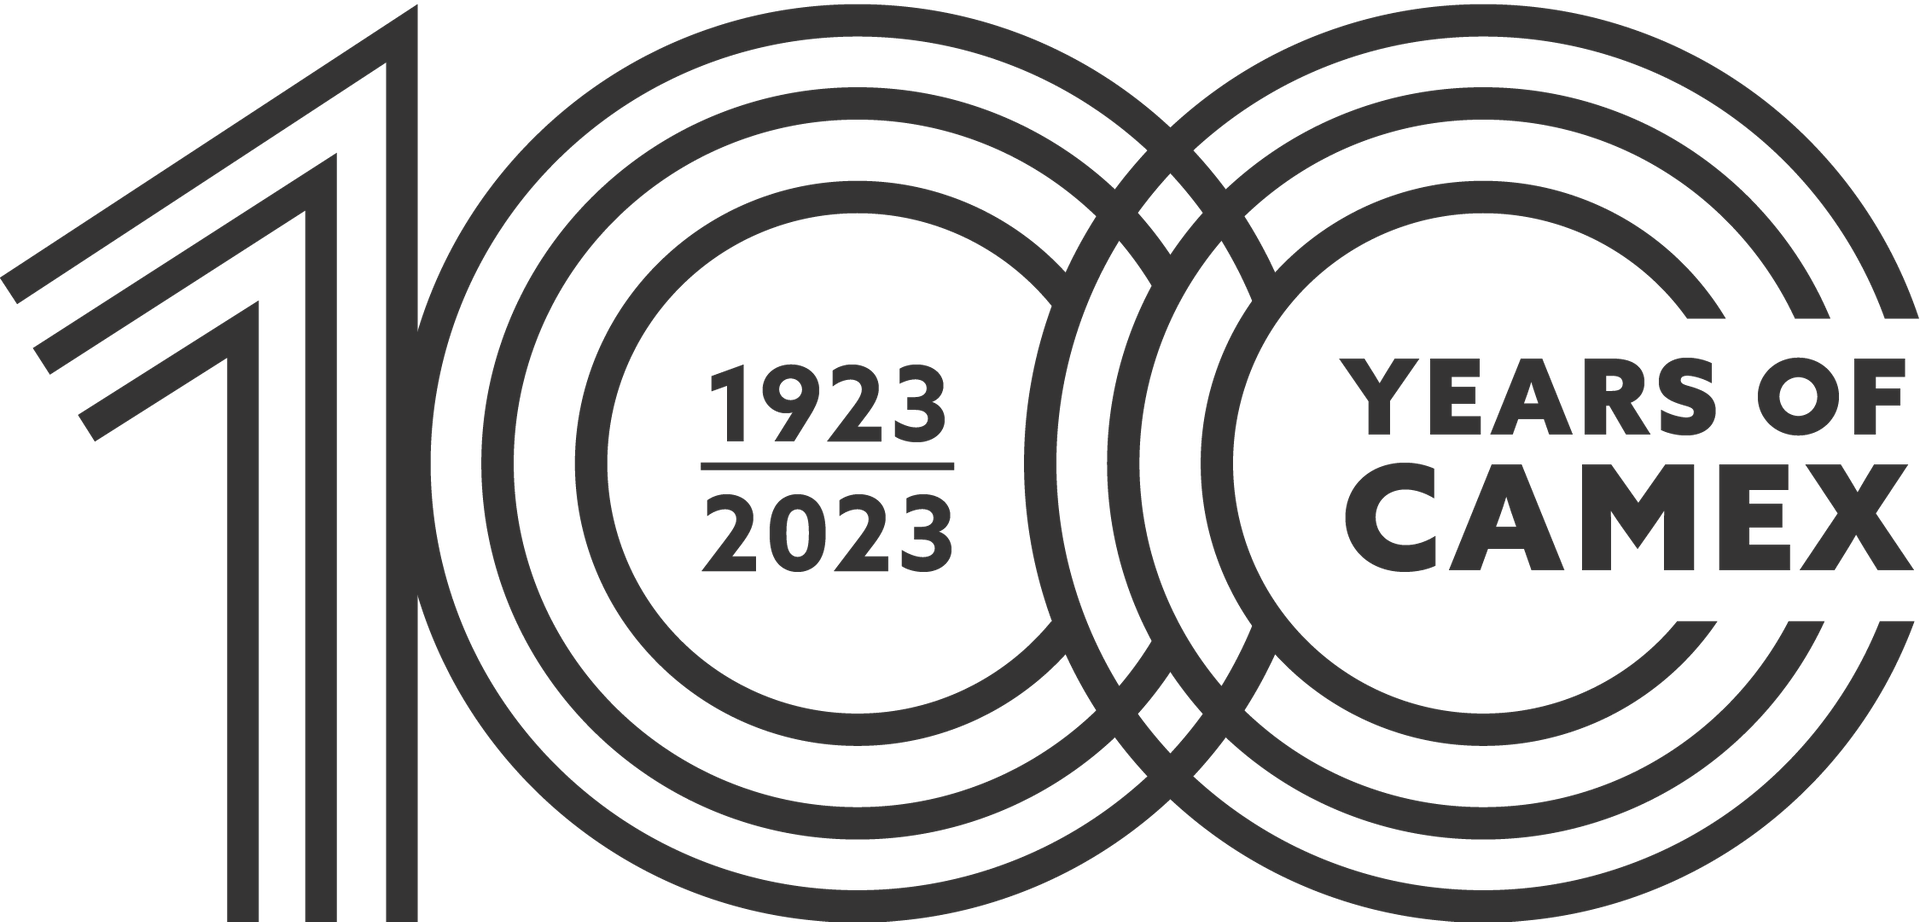 A black and white logo for the 100th anniversary of camex.